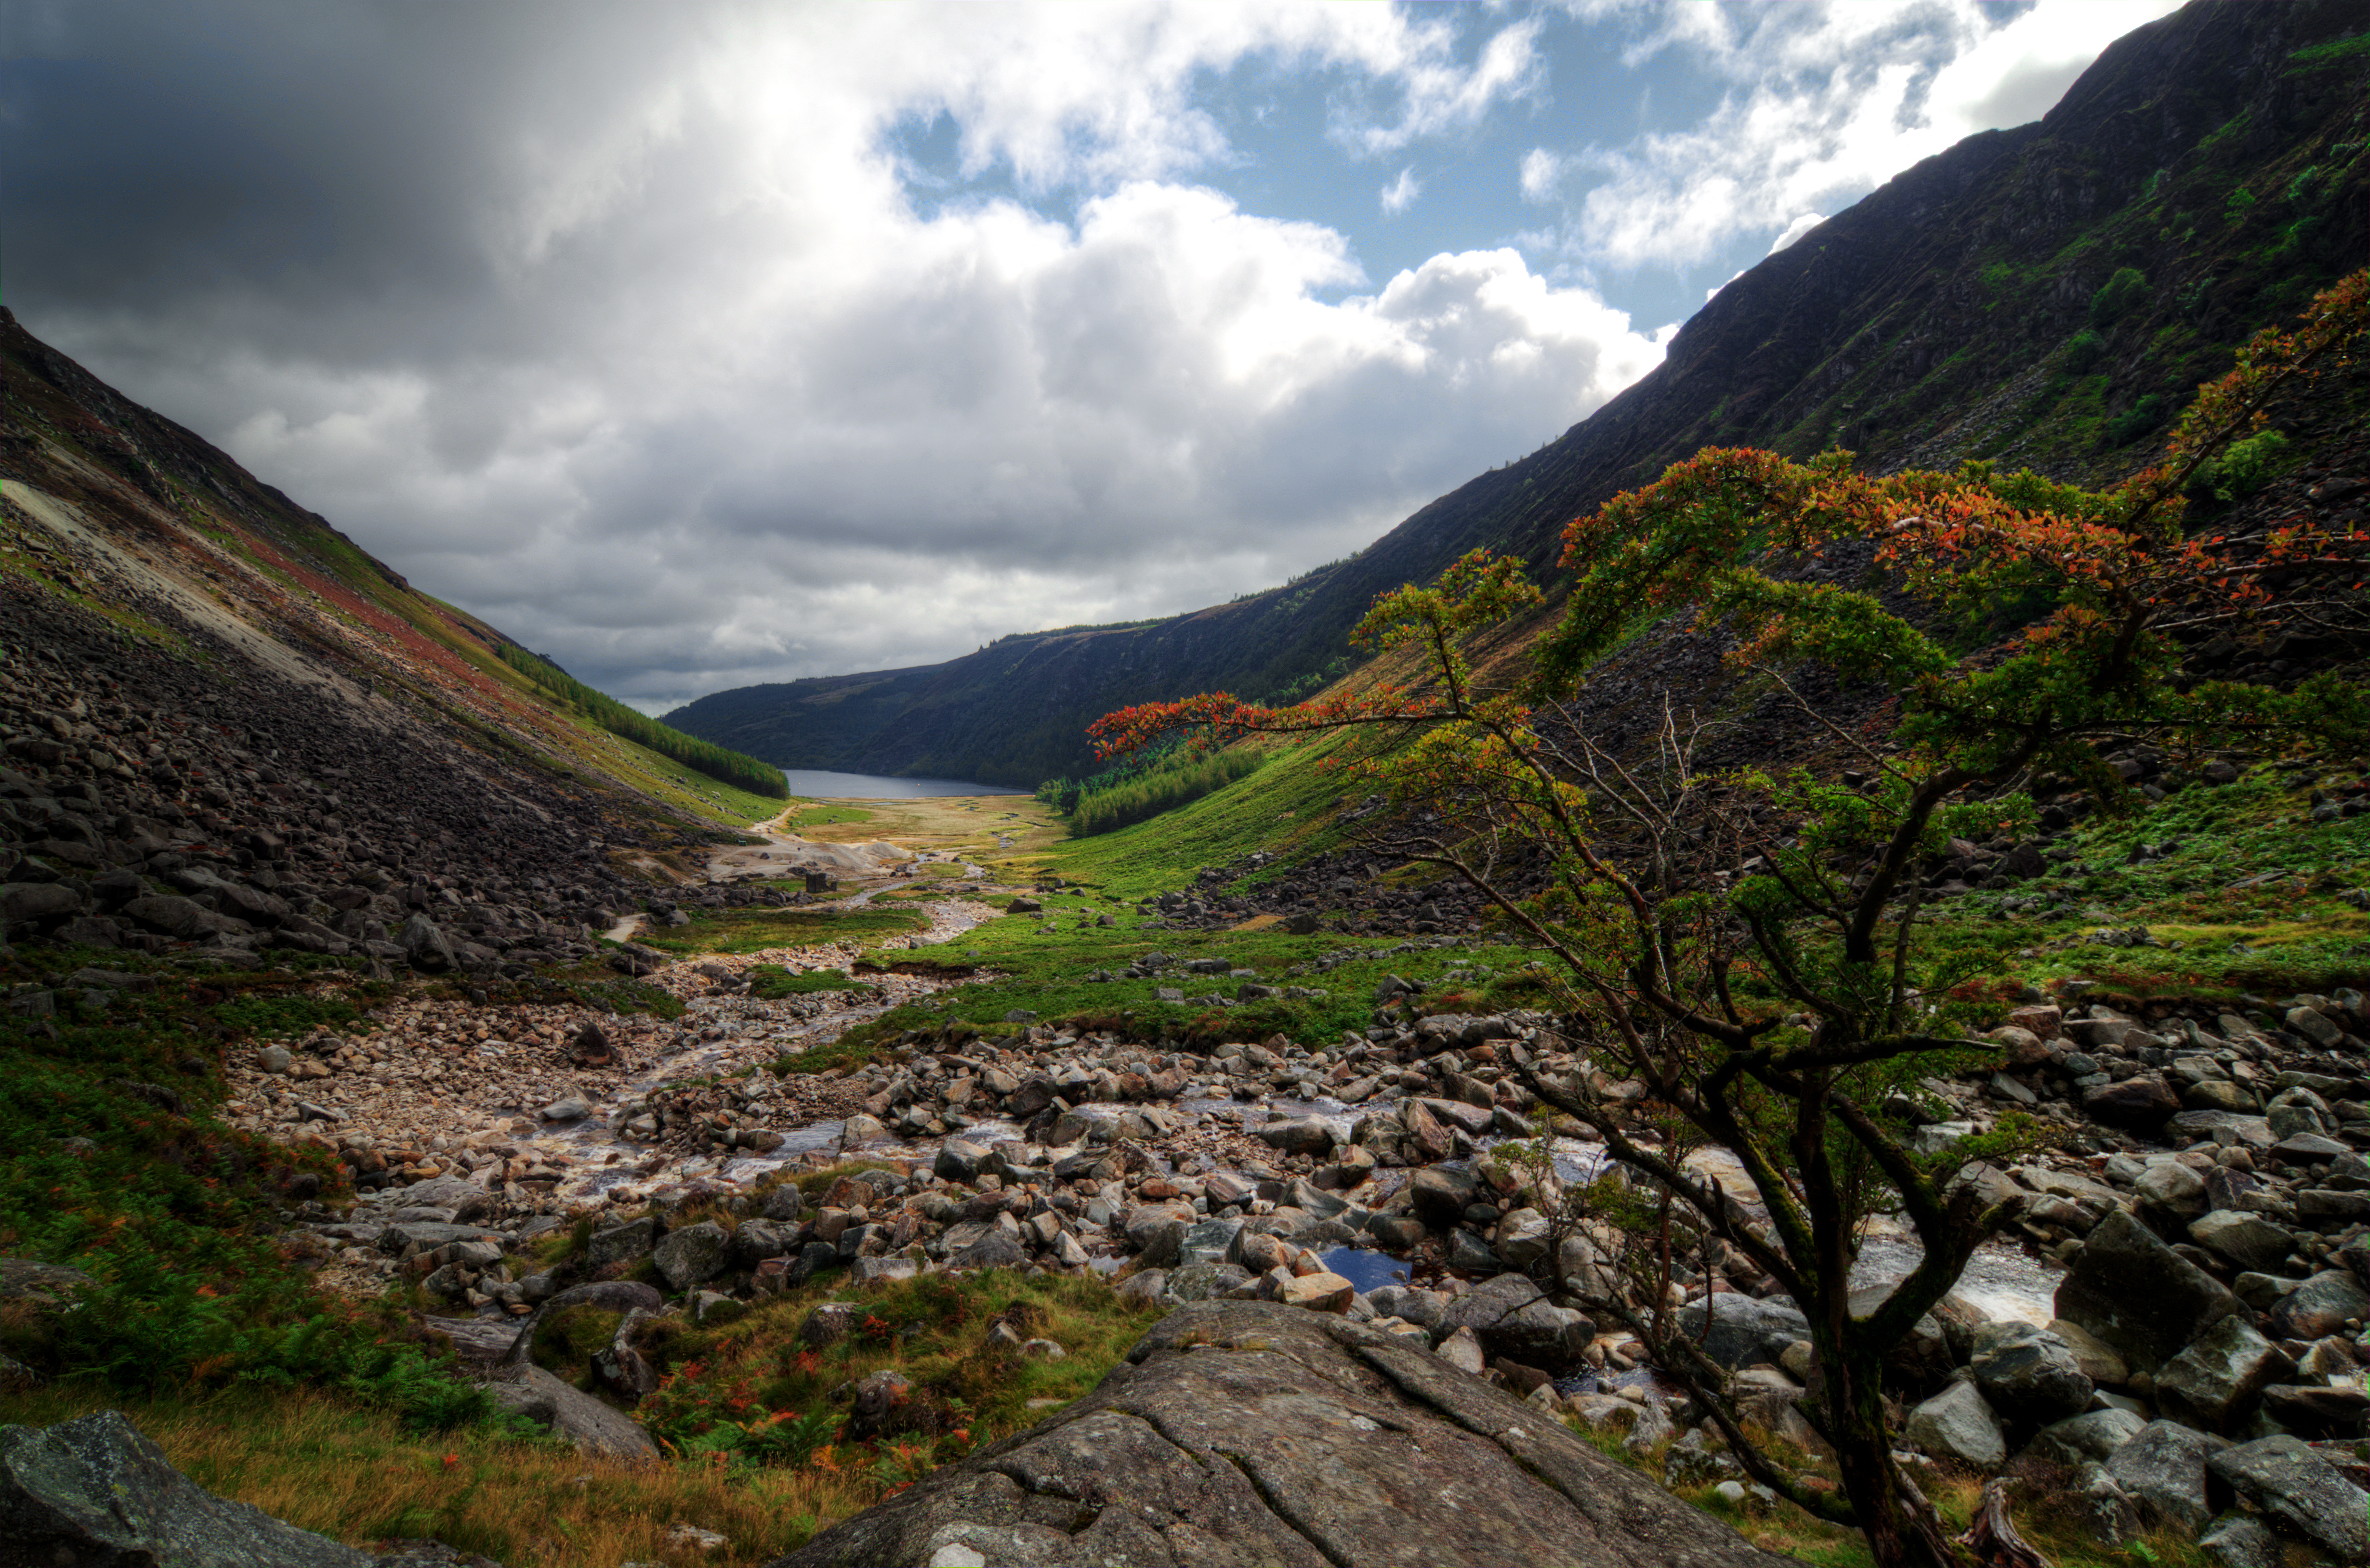 Hiking in the marvellous nature of Glendalough in Ireland